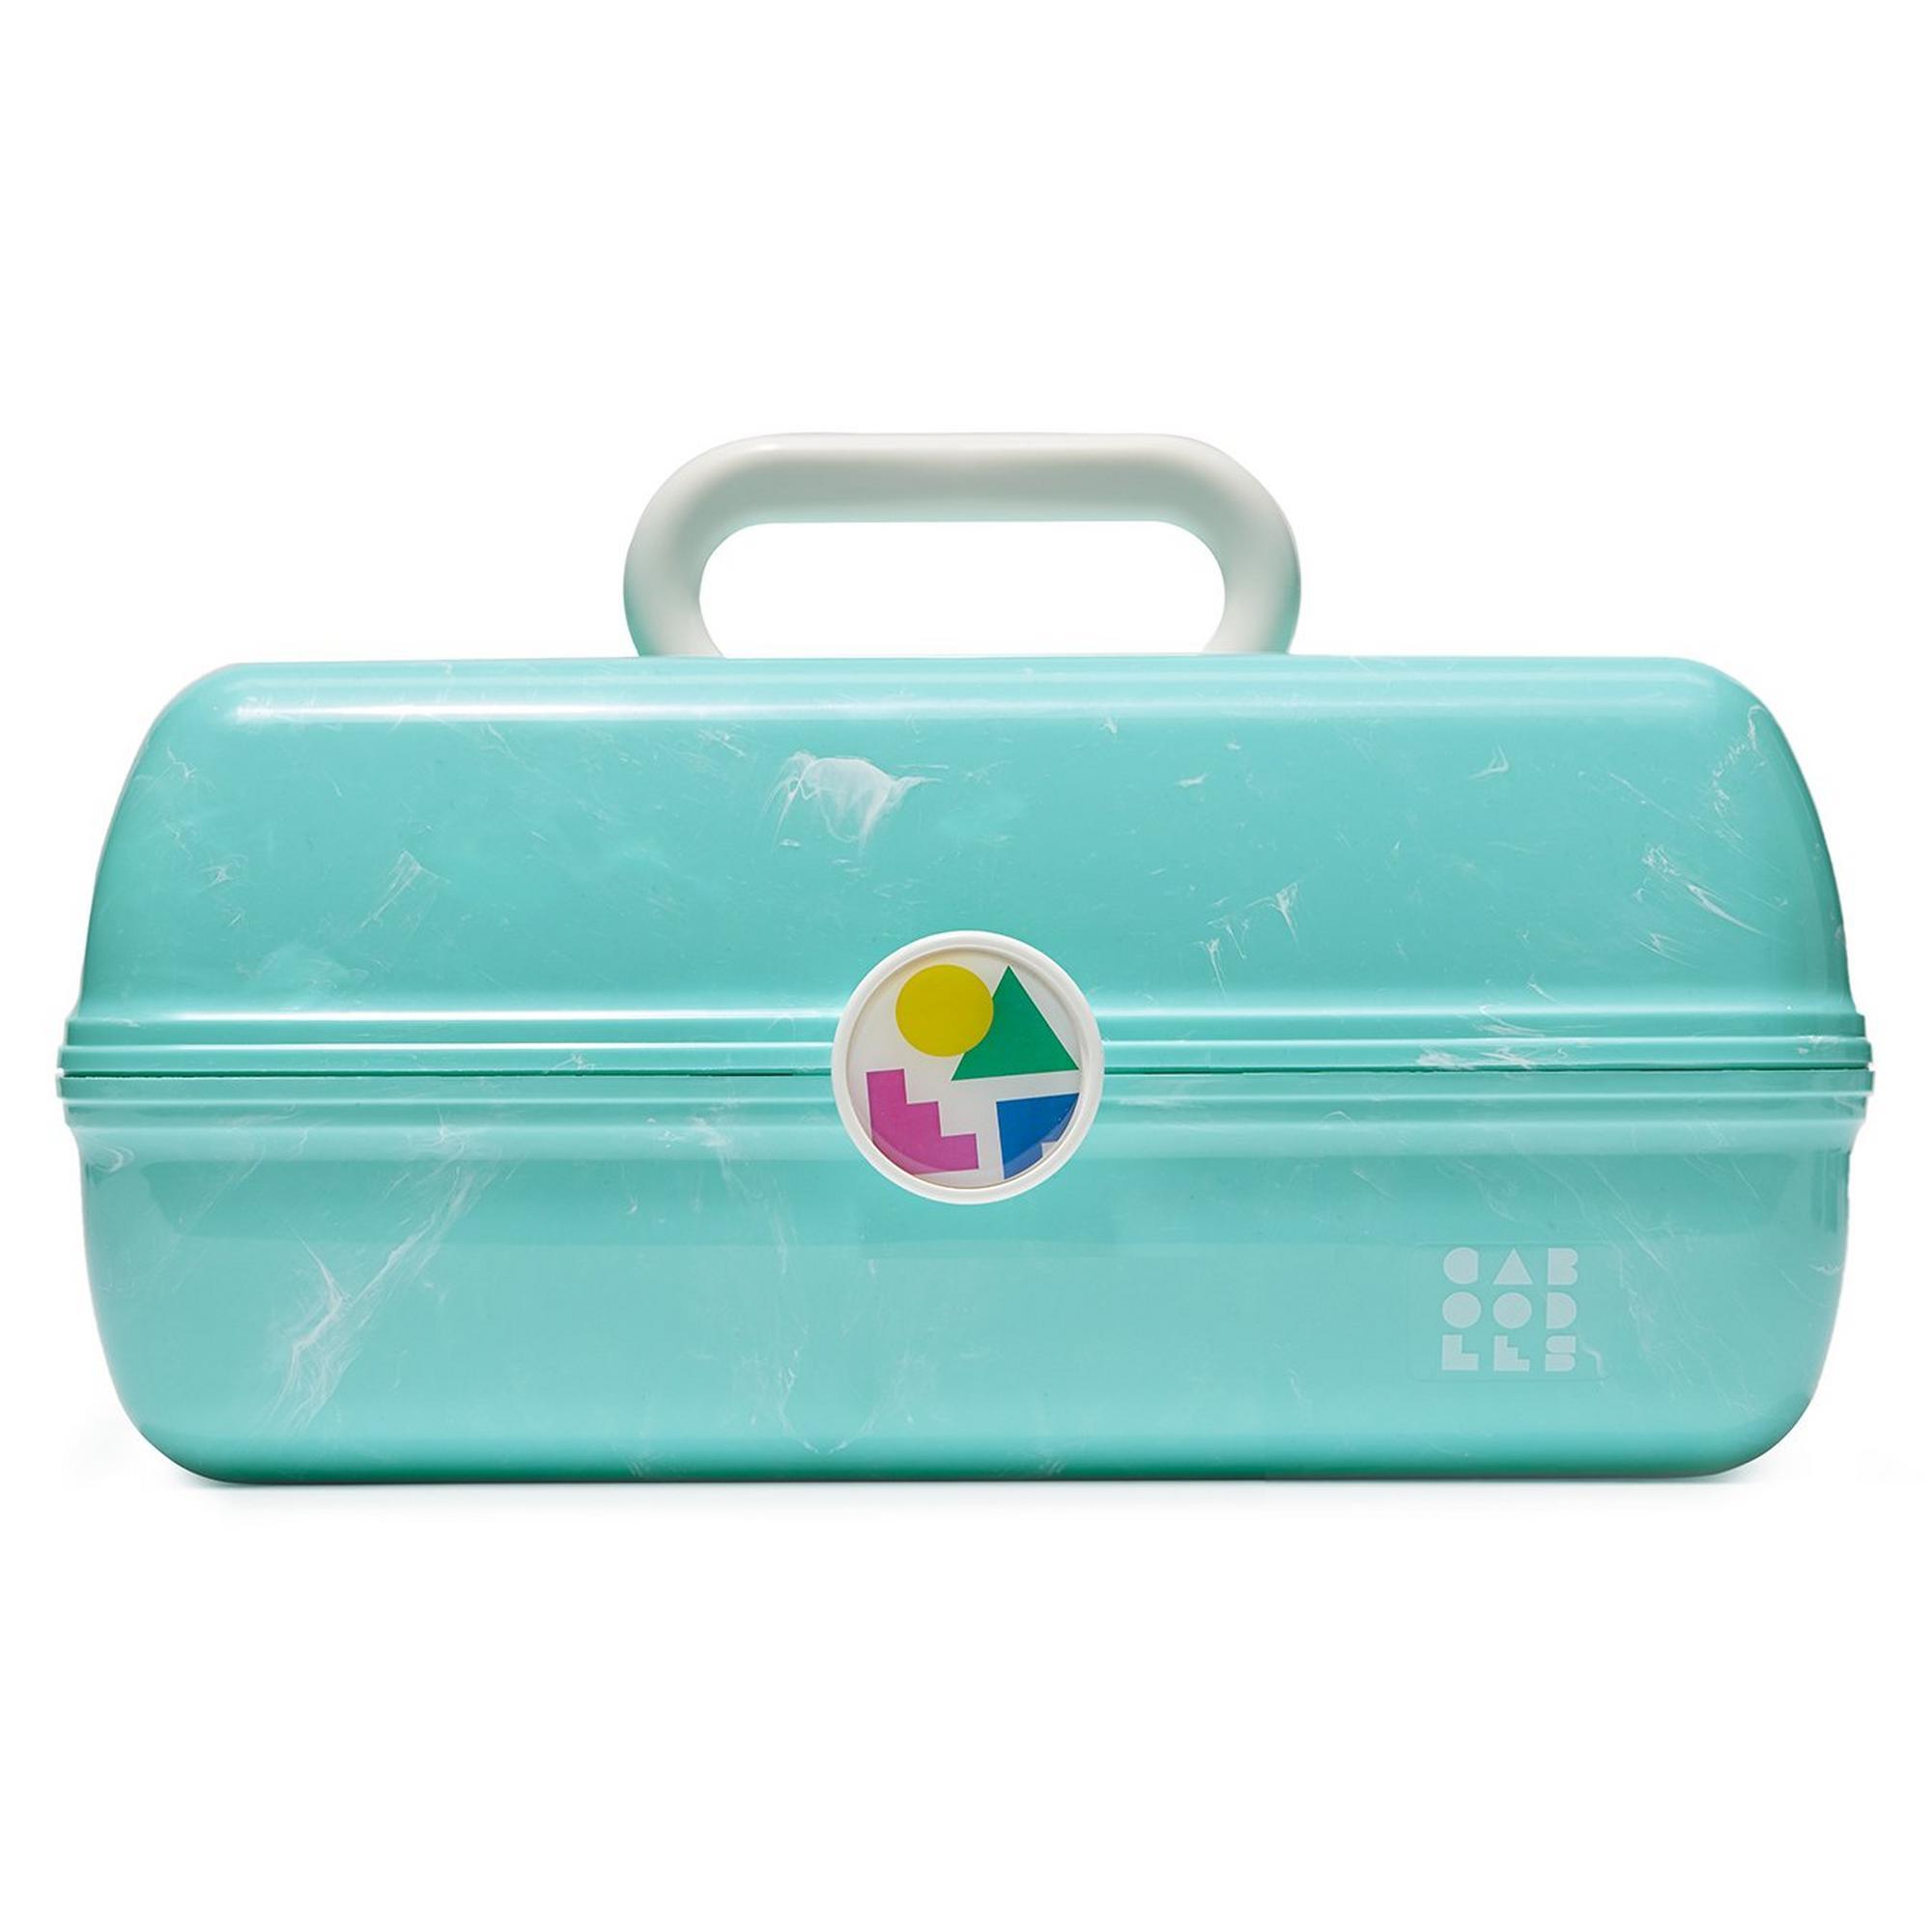 A teal, rounded-edge, plastic Caboodle case.